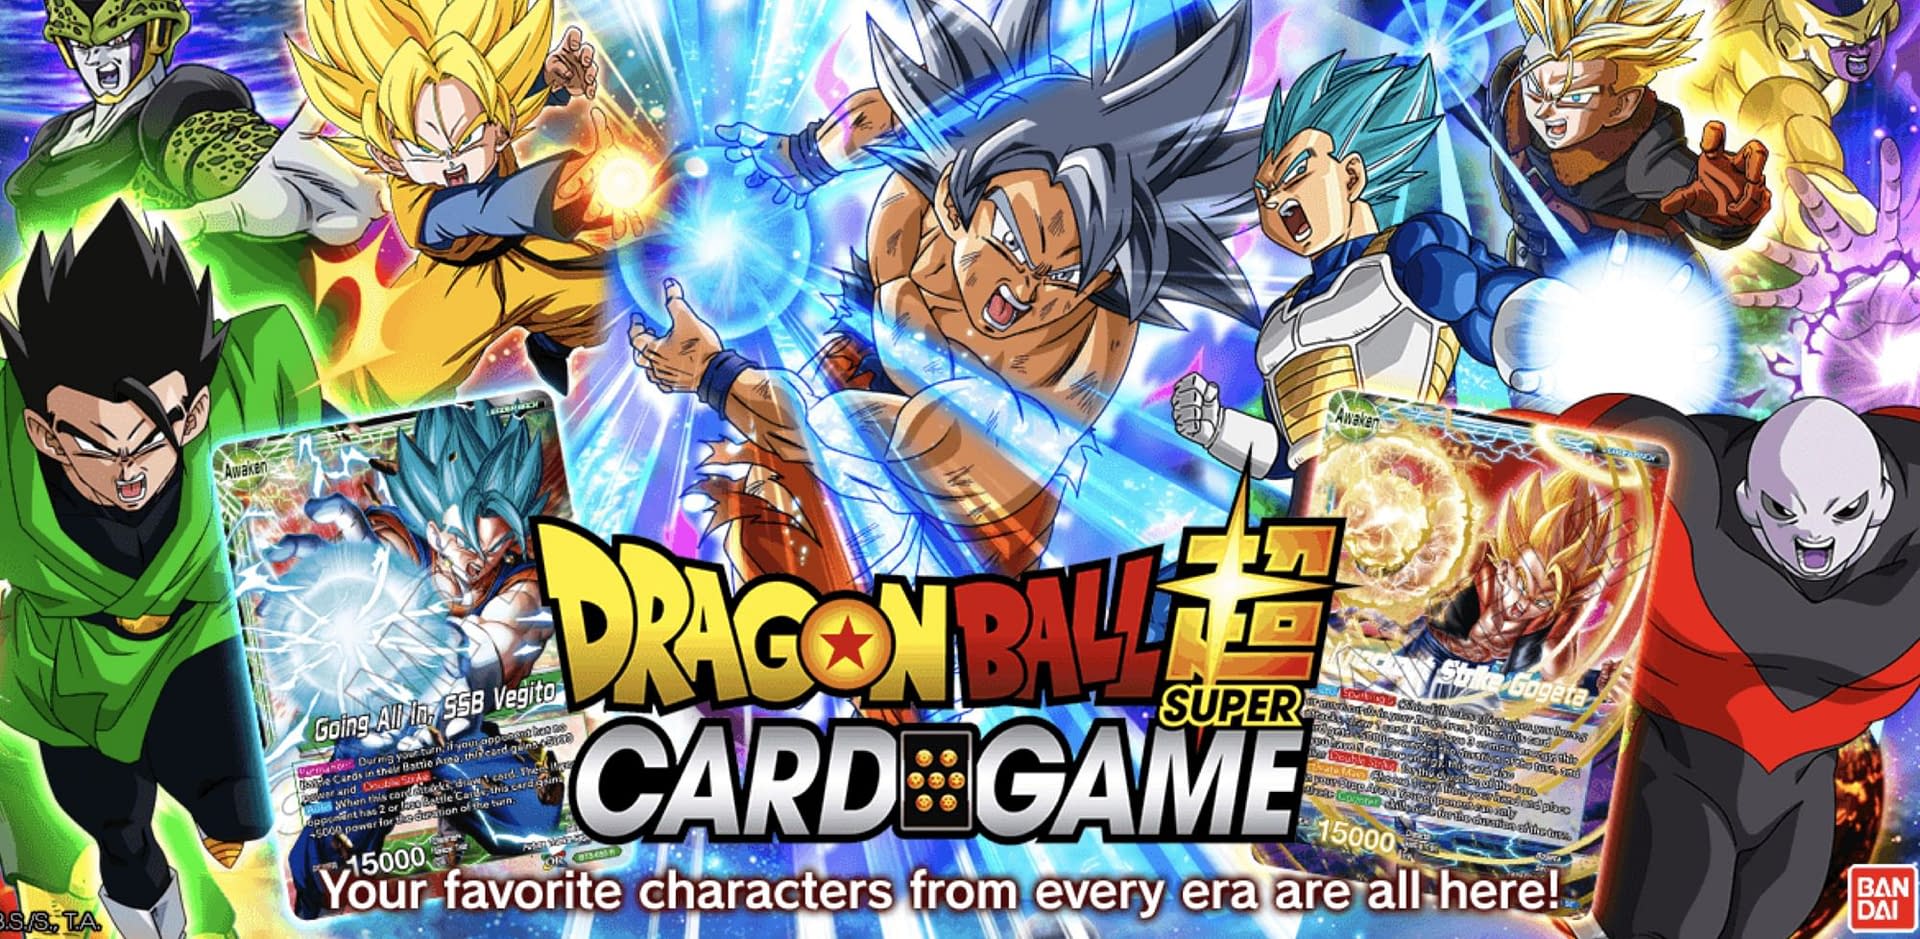 Dragon Ball Super Card Game Hopes For 2023 Collector’s Wishes